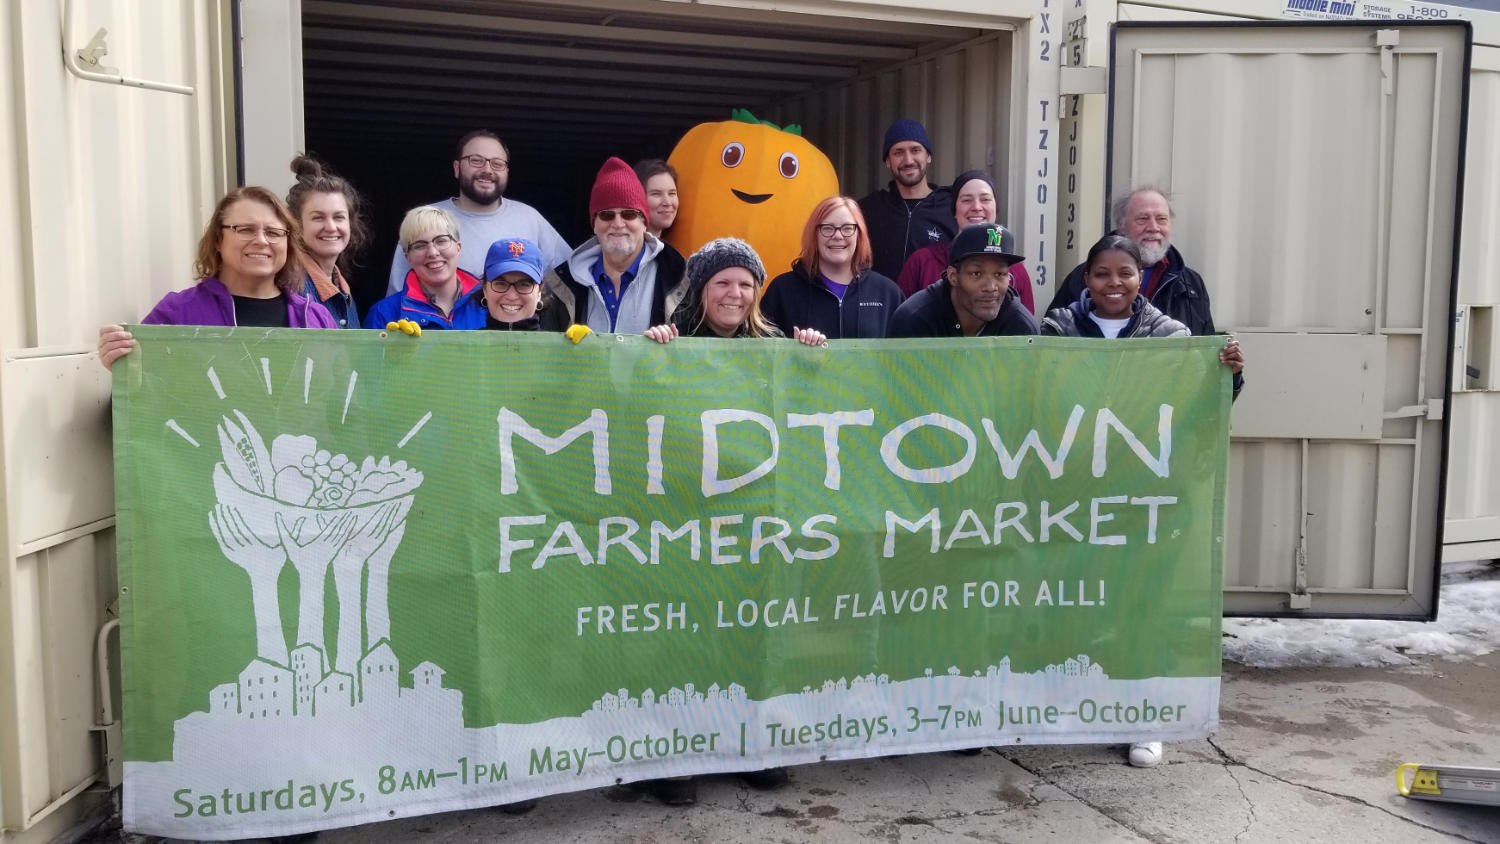 Group of fourteen people behind a large cloth sign for MIDTOWN FARMERS MARKET plus a smiley face atop a human-size orange carrot